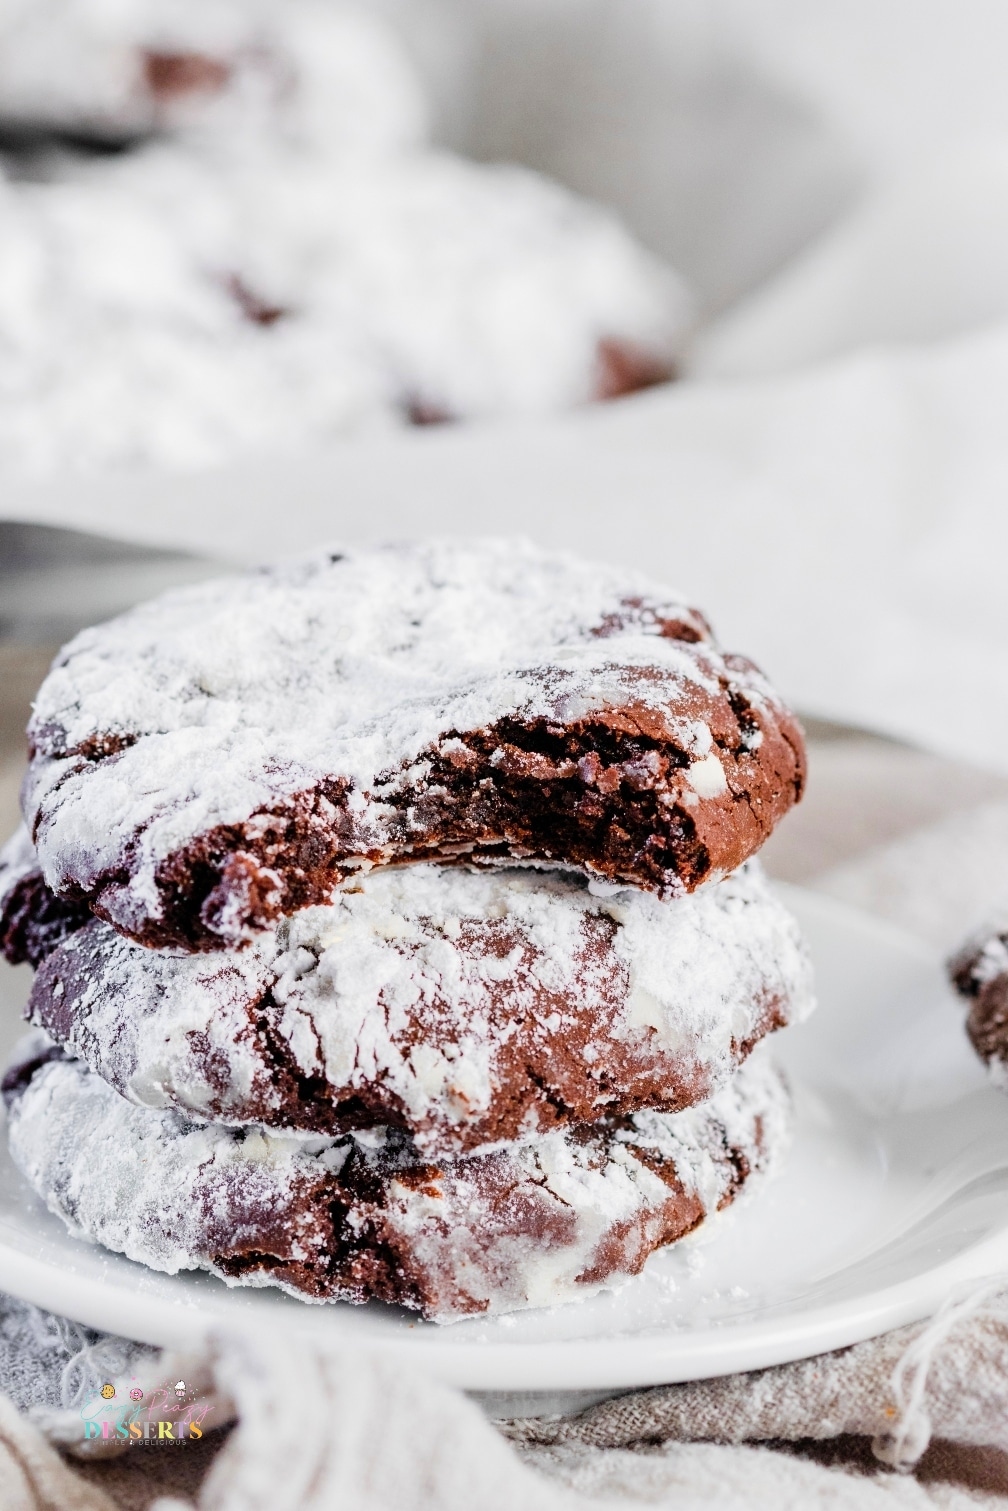 Close up image of chocolate crinkles